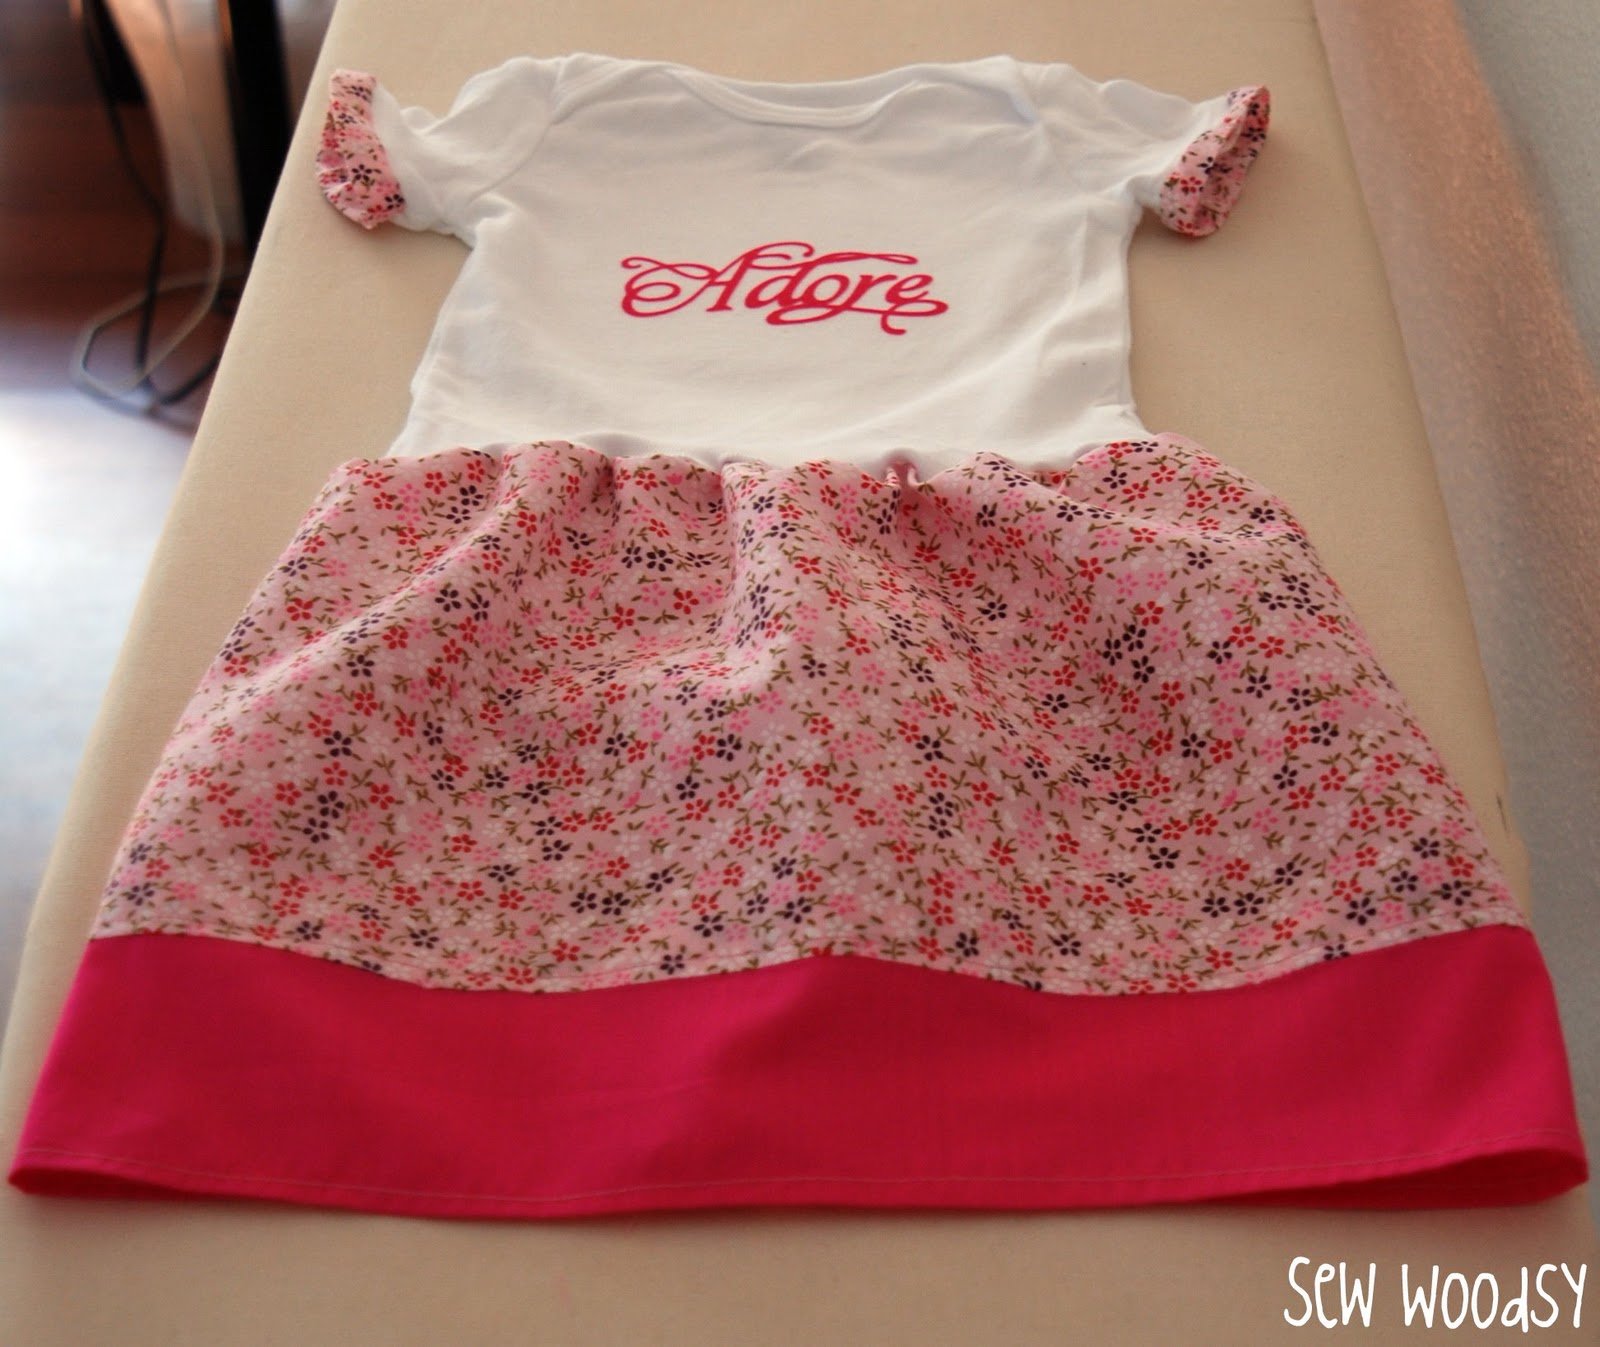 White top with flower skirt and pink trim on an ironing board.